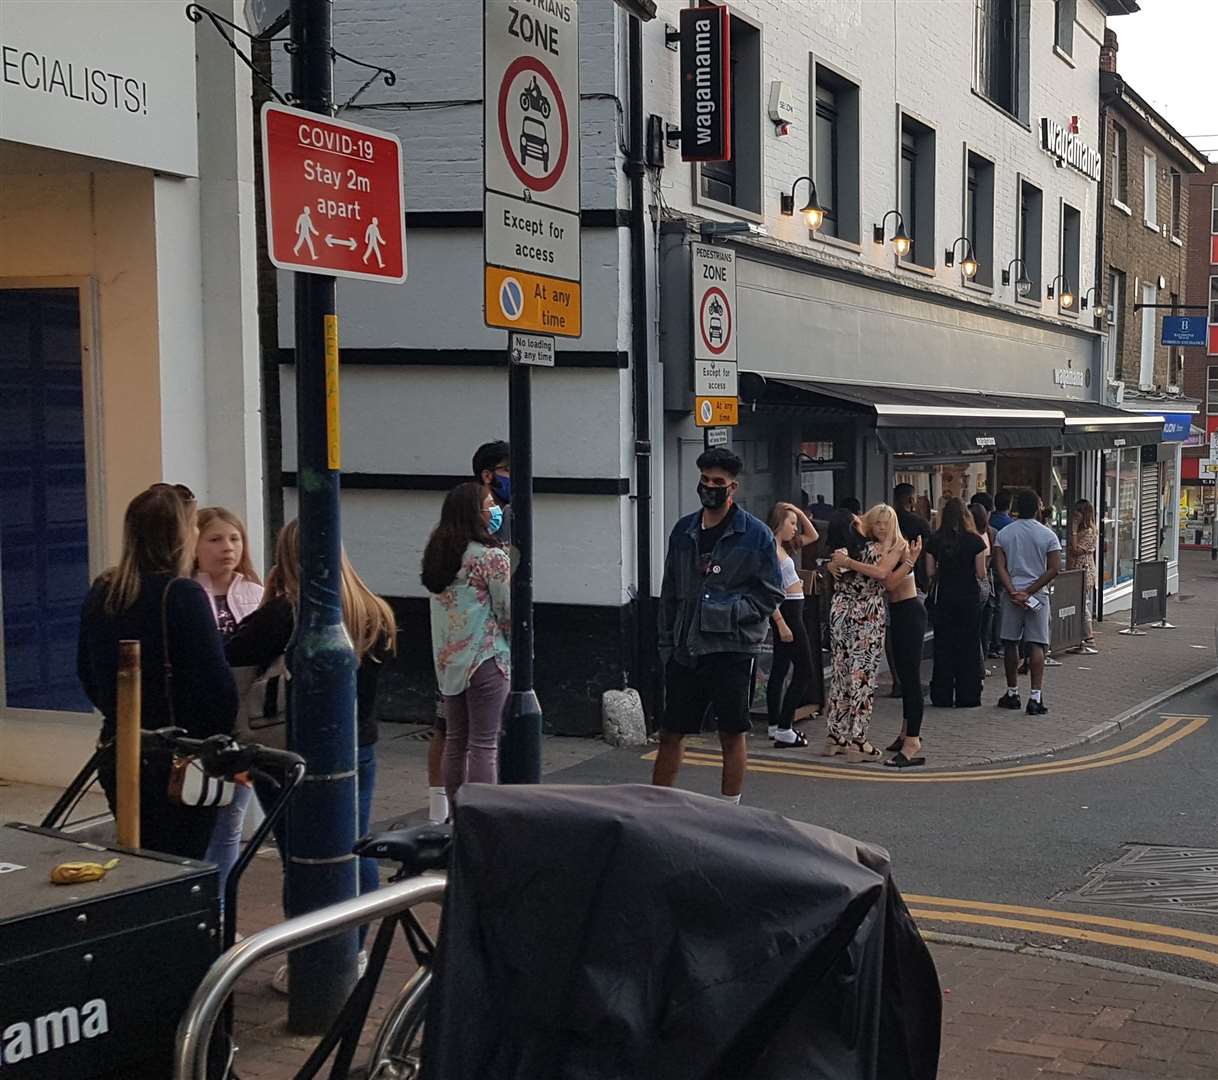 Queues outside Wagamama in Maidstone